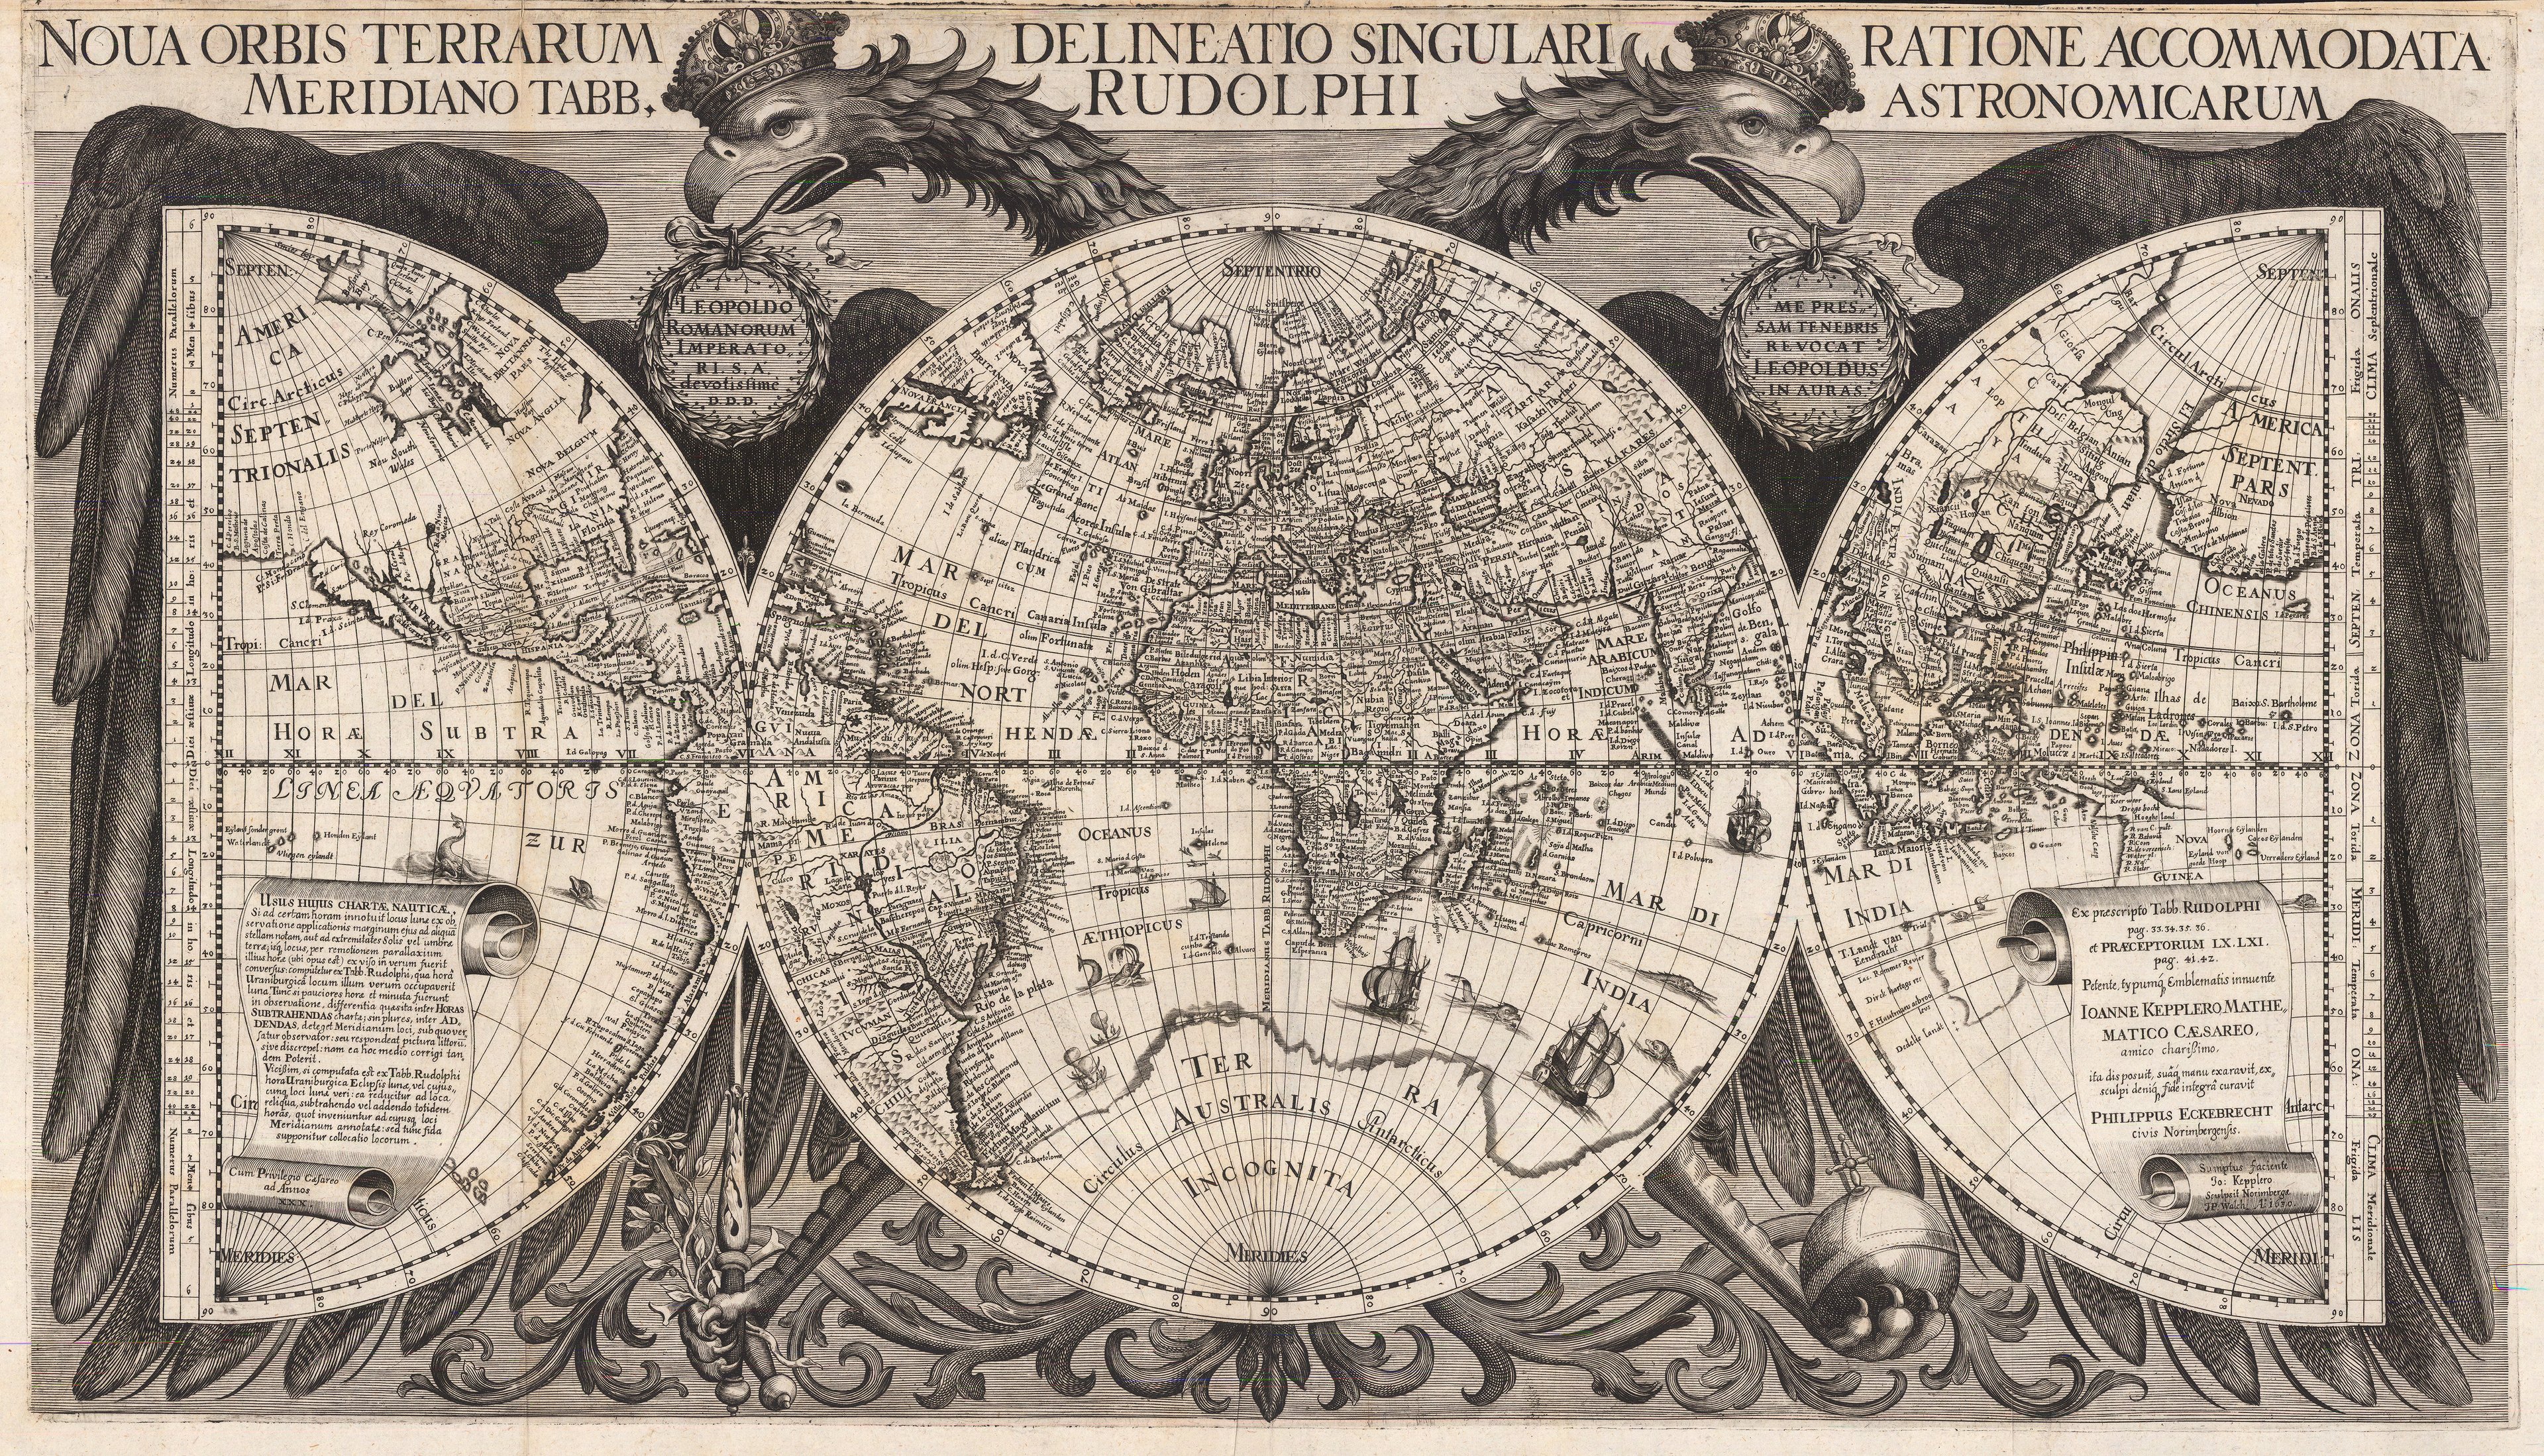 Engraved map of the world in a bifurcated double-hemisphere form